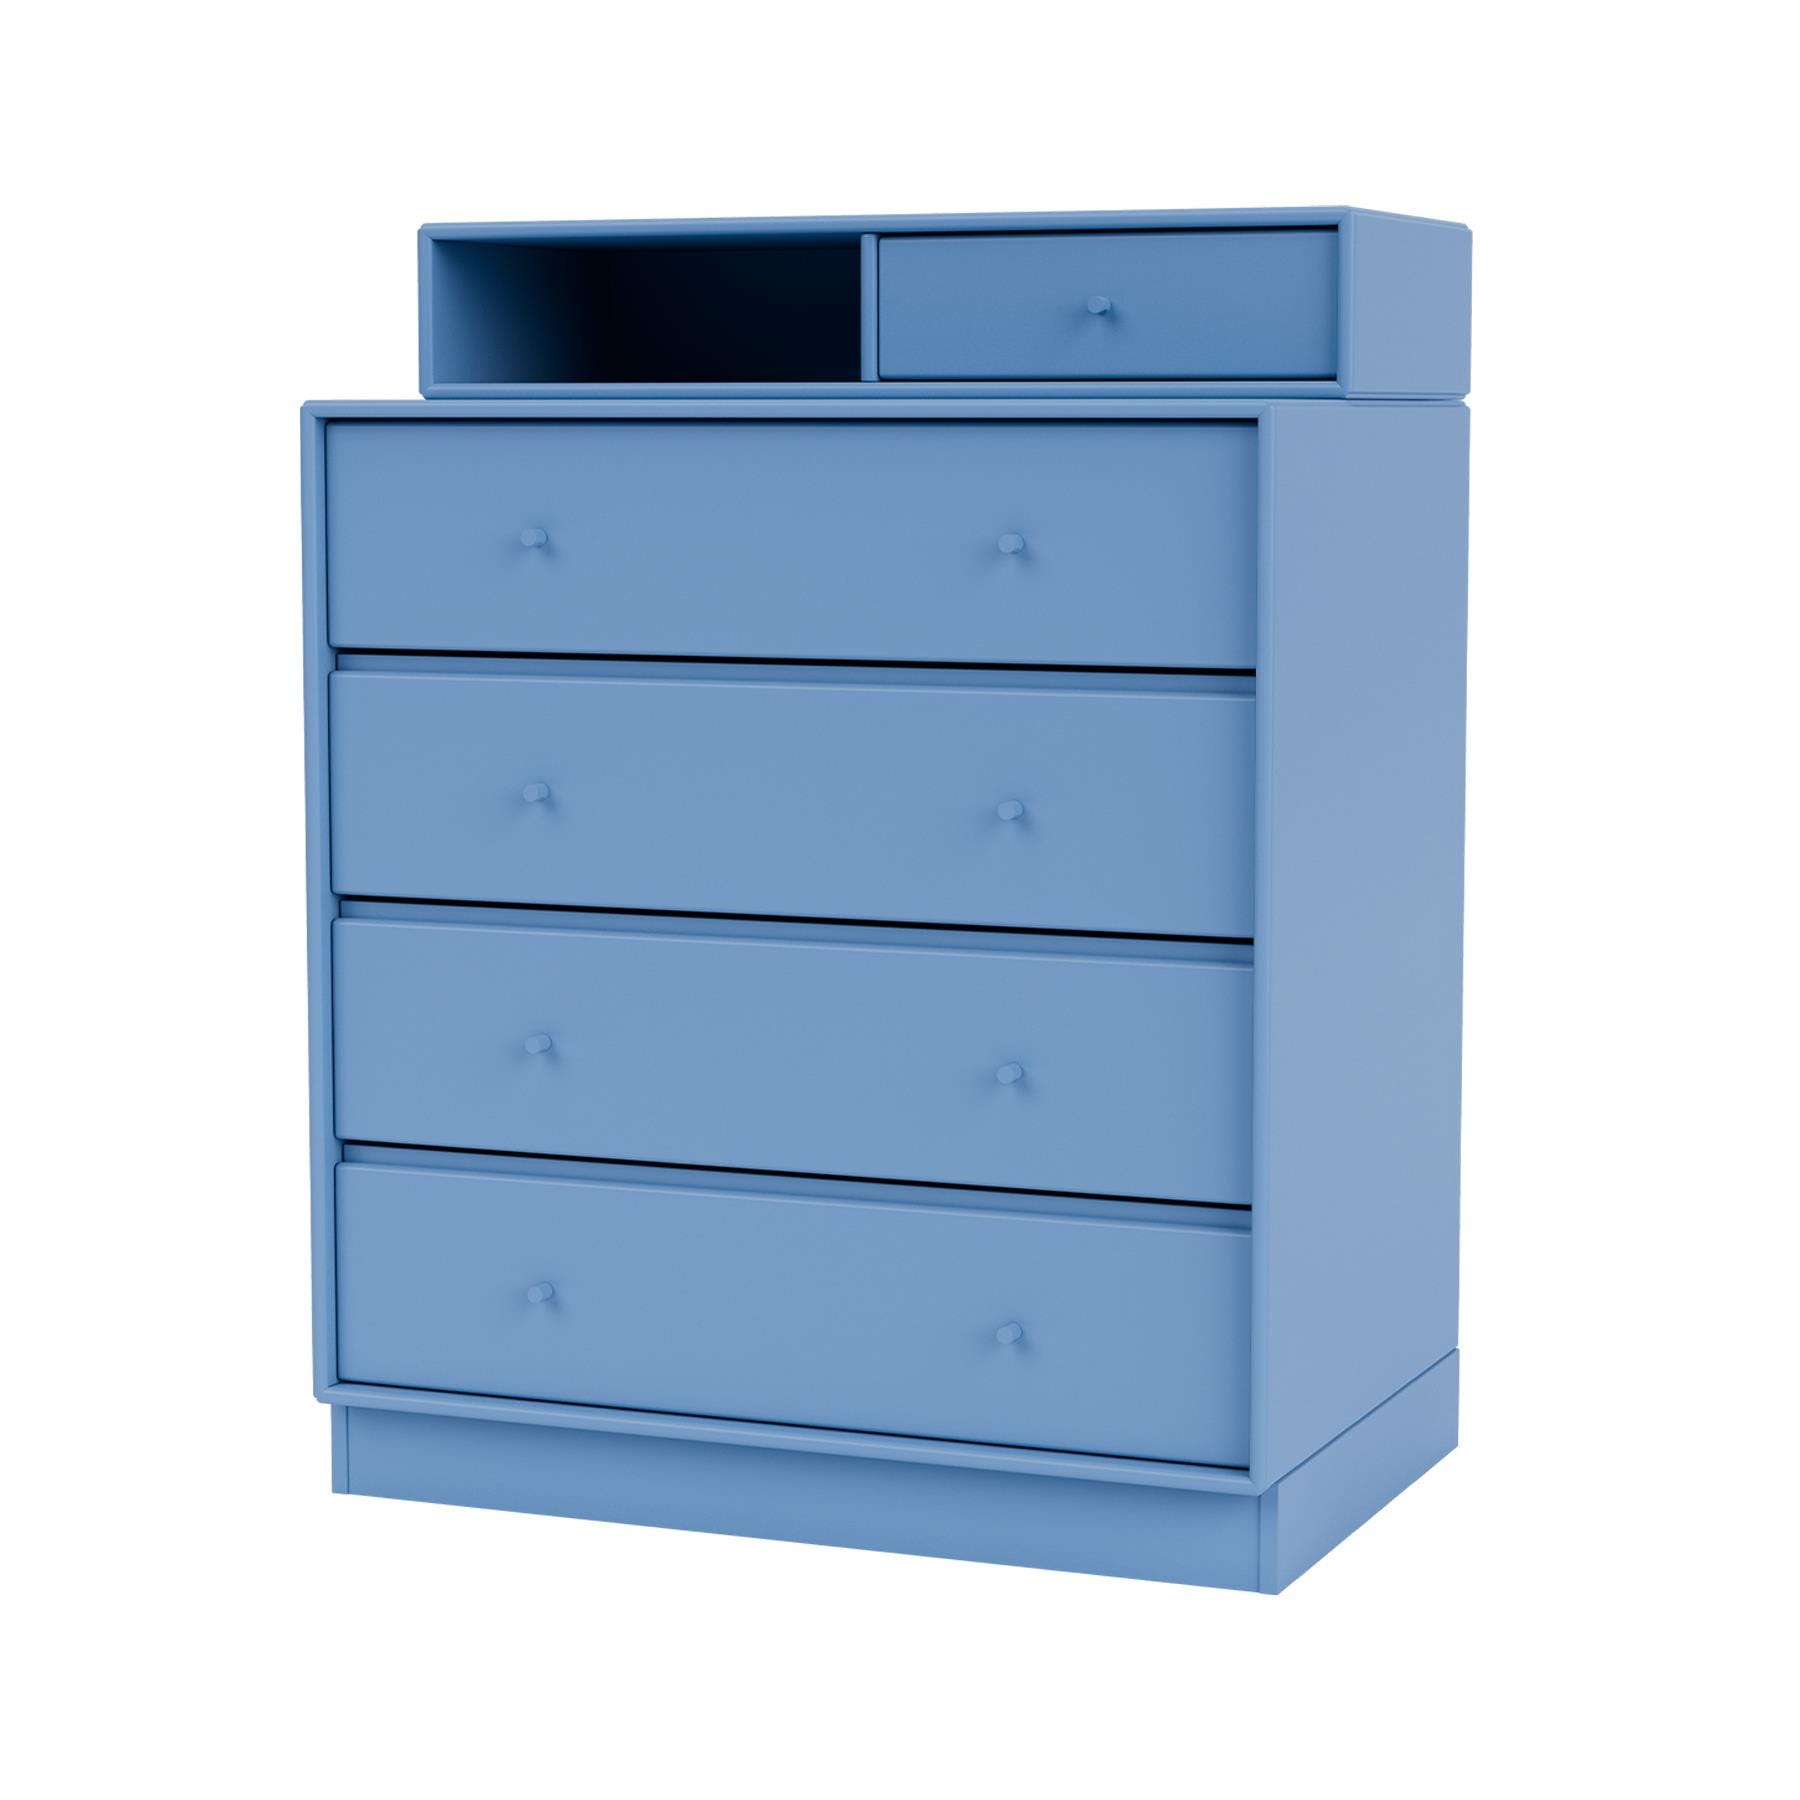 Montana Keep Chest Of Drawers Azure Plinth Blue Designer Furniture From Holloways Of Ludlow